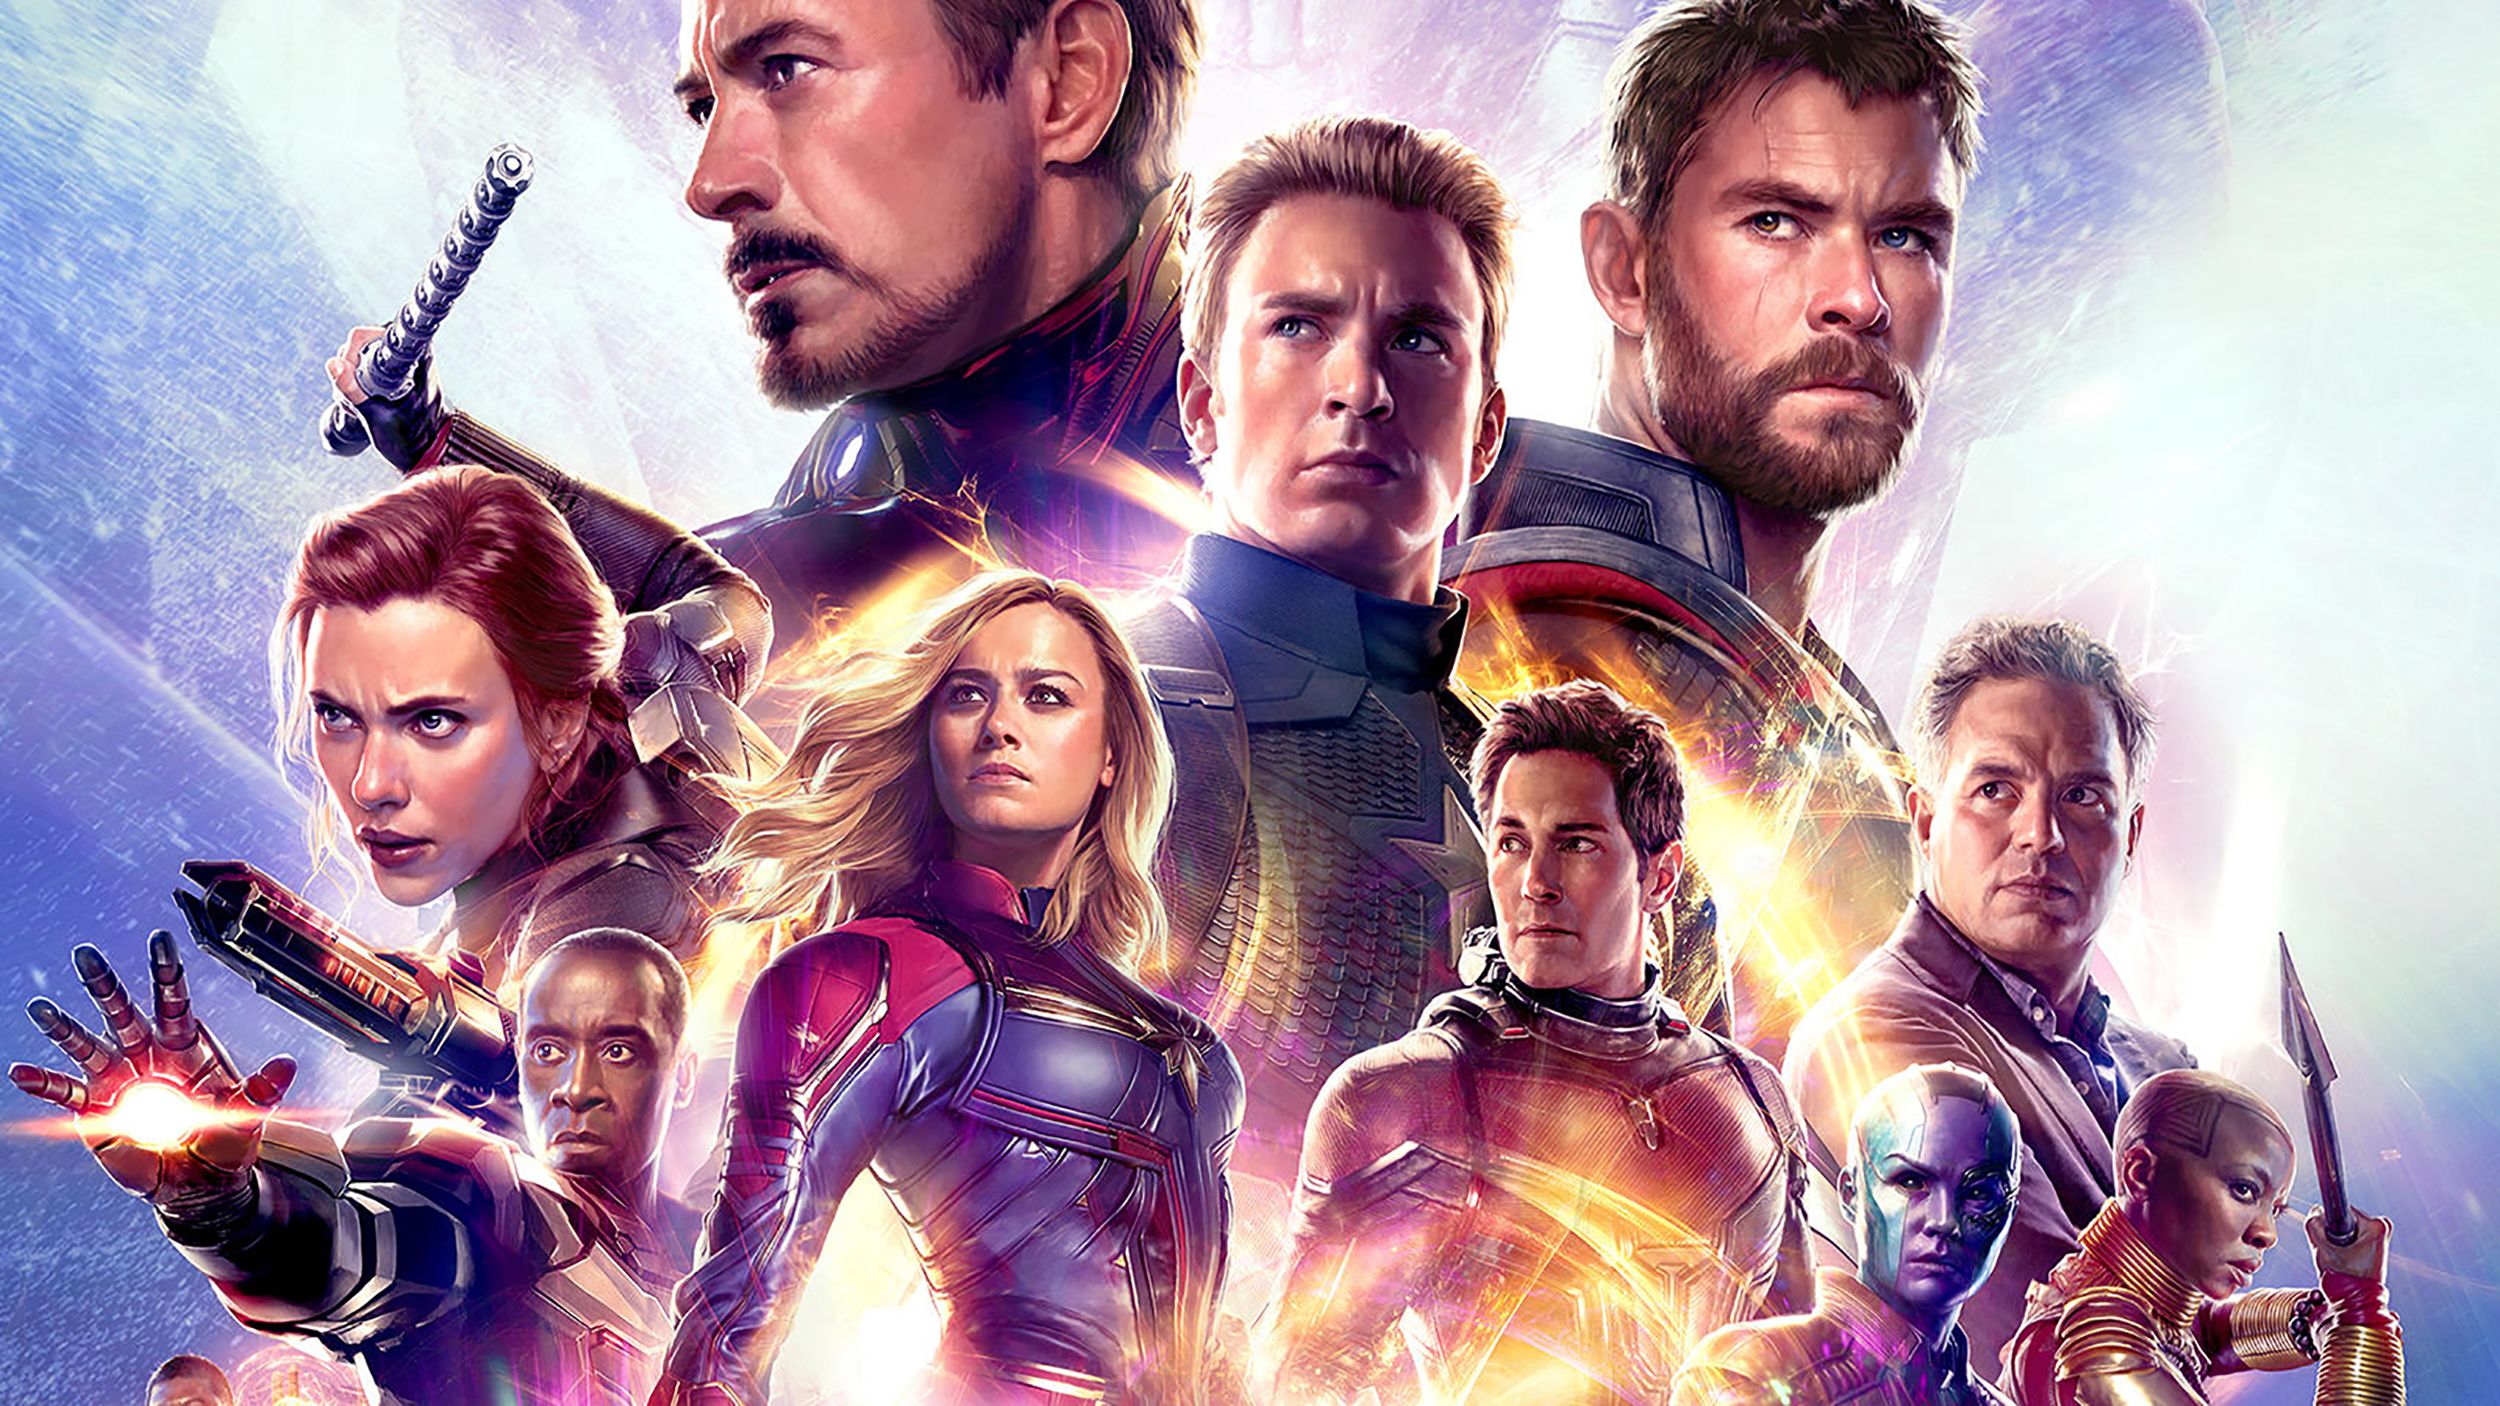 Avengers: Endgame': A spoiler-y discussion about Marvel's epic